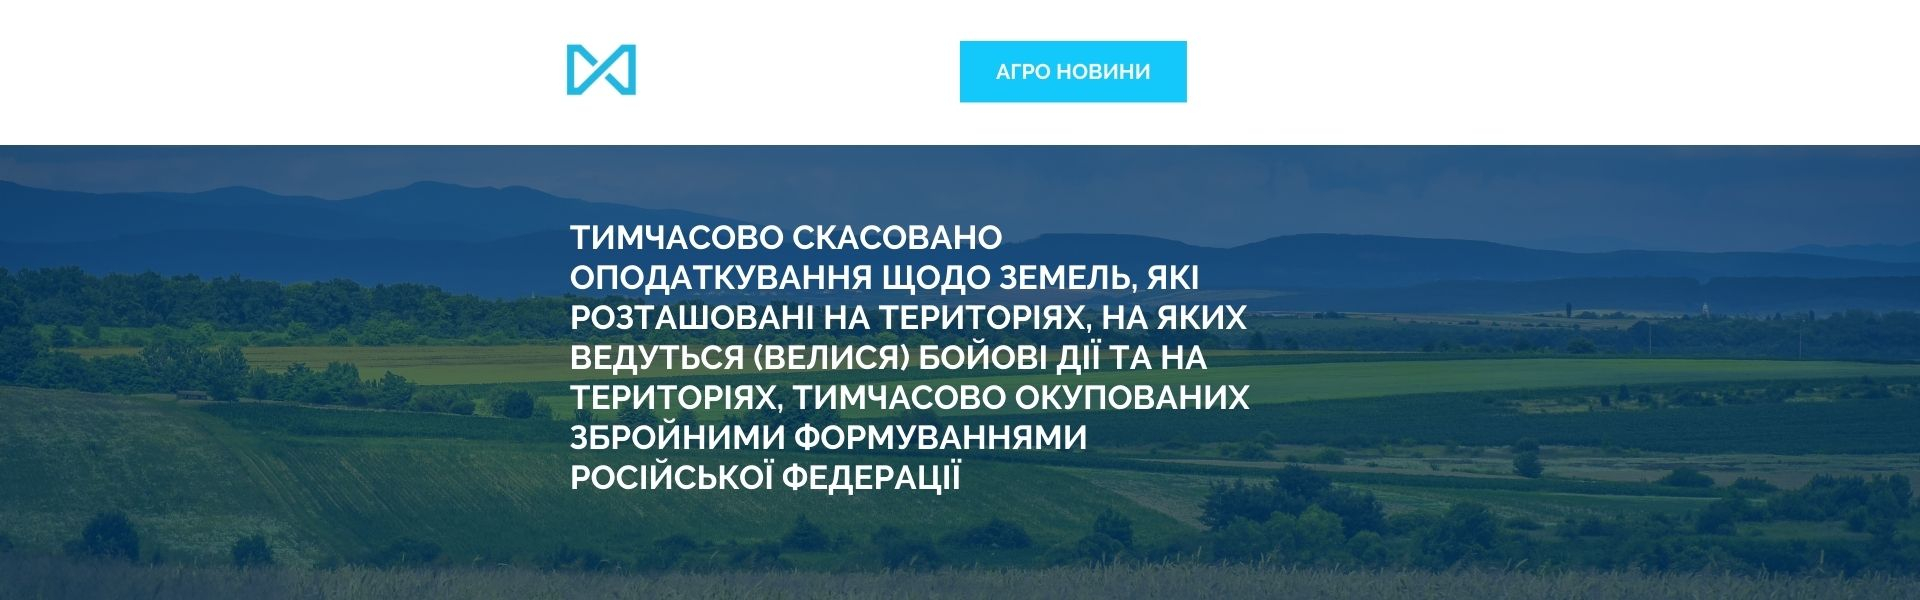 Taxation on lands located in the territories where hostilities are being conducted and in the territories temporarily occupied by the armed forces of the Russian Federation has been temporarily abolished